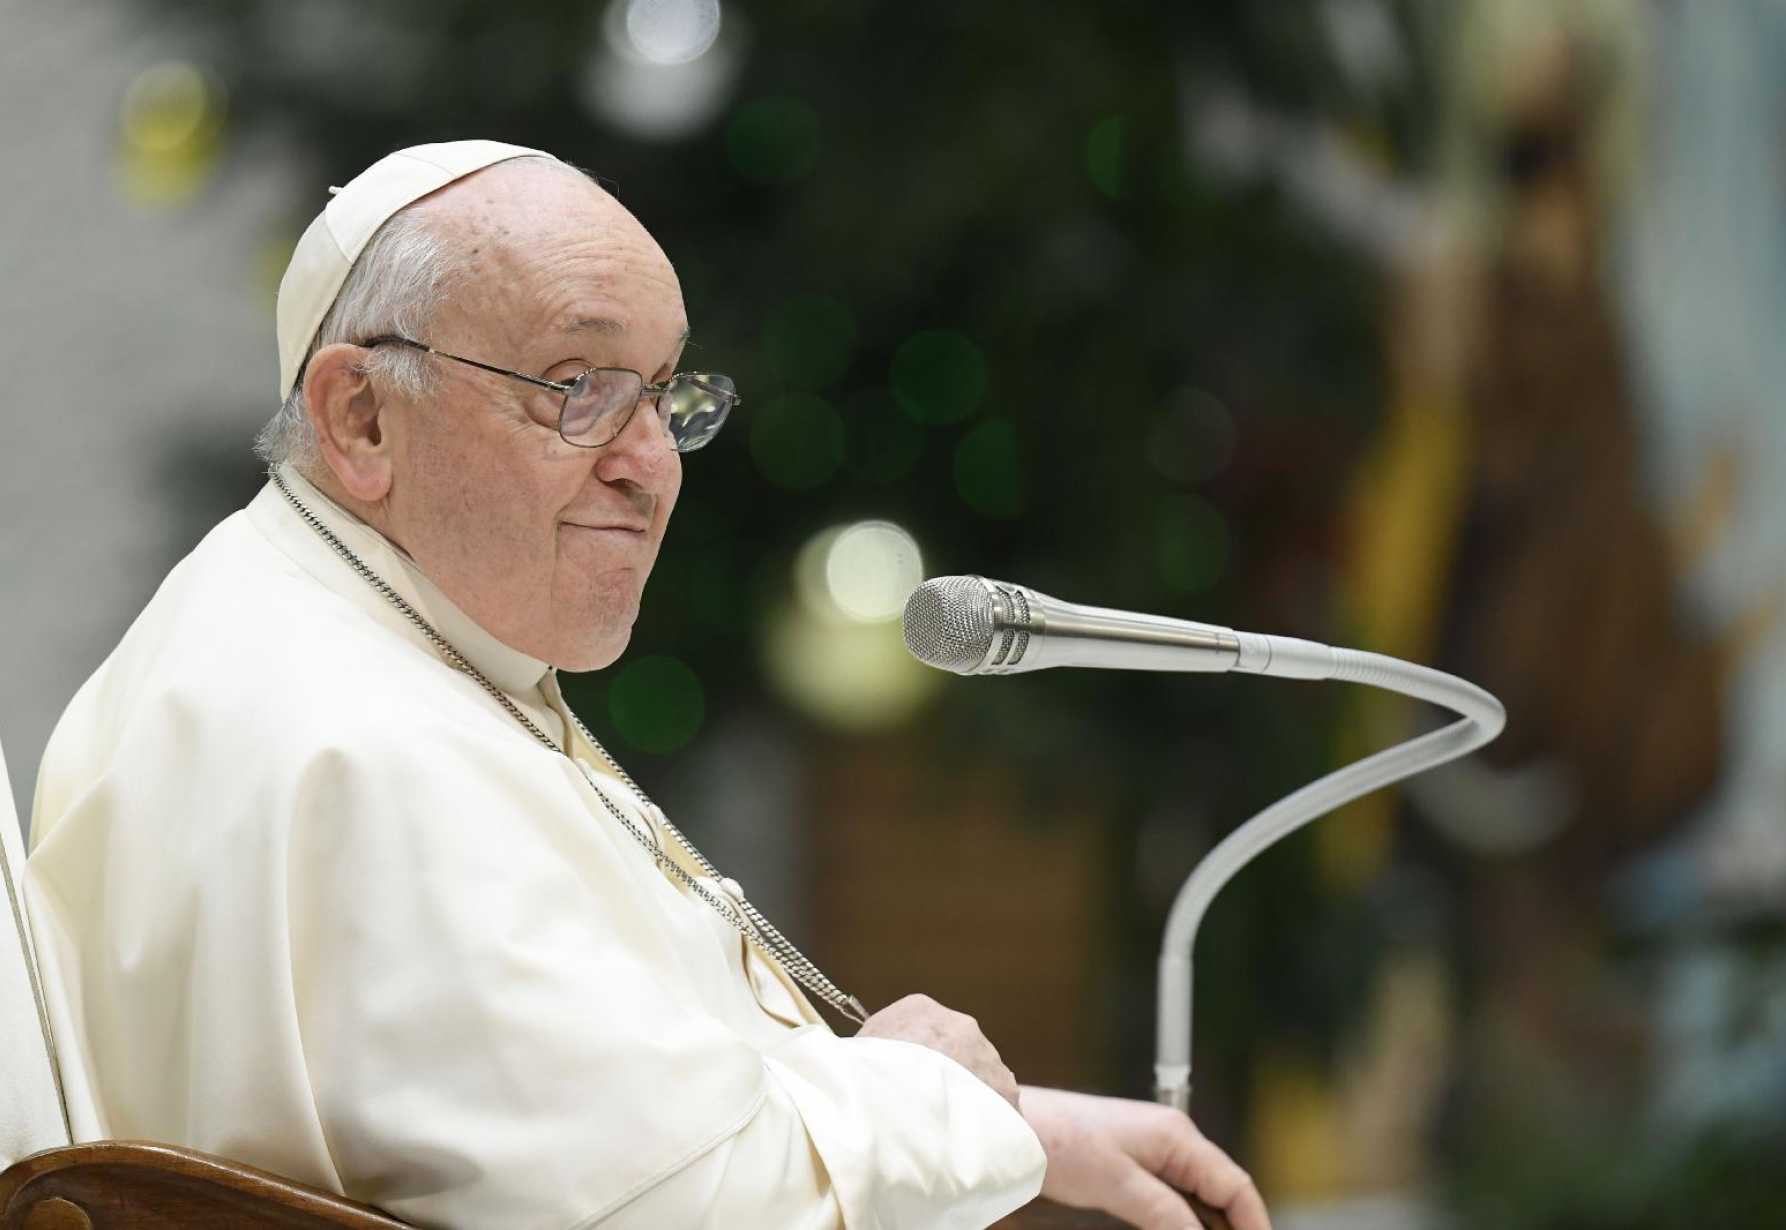 Everyone faces temptation, but Jesus is always close by, pope says